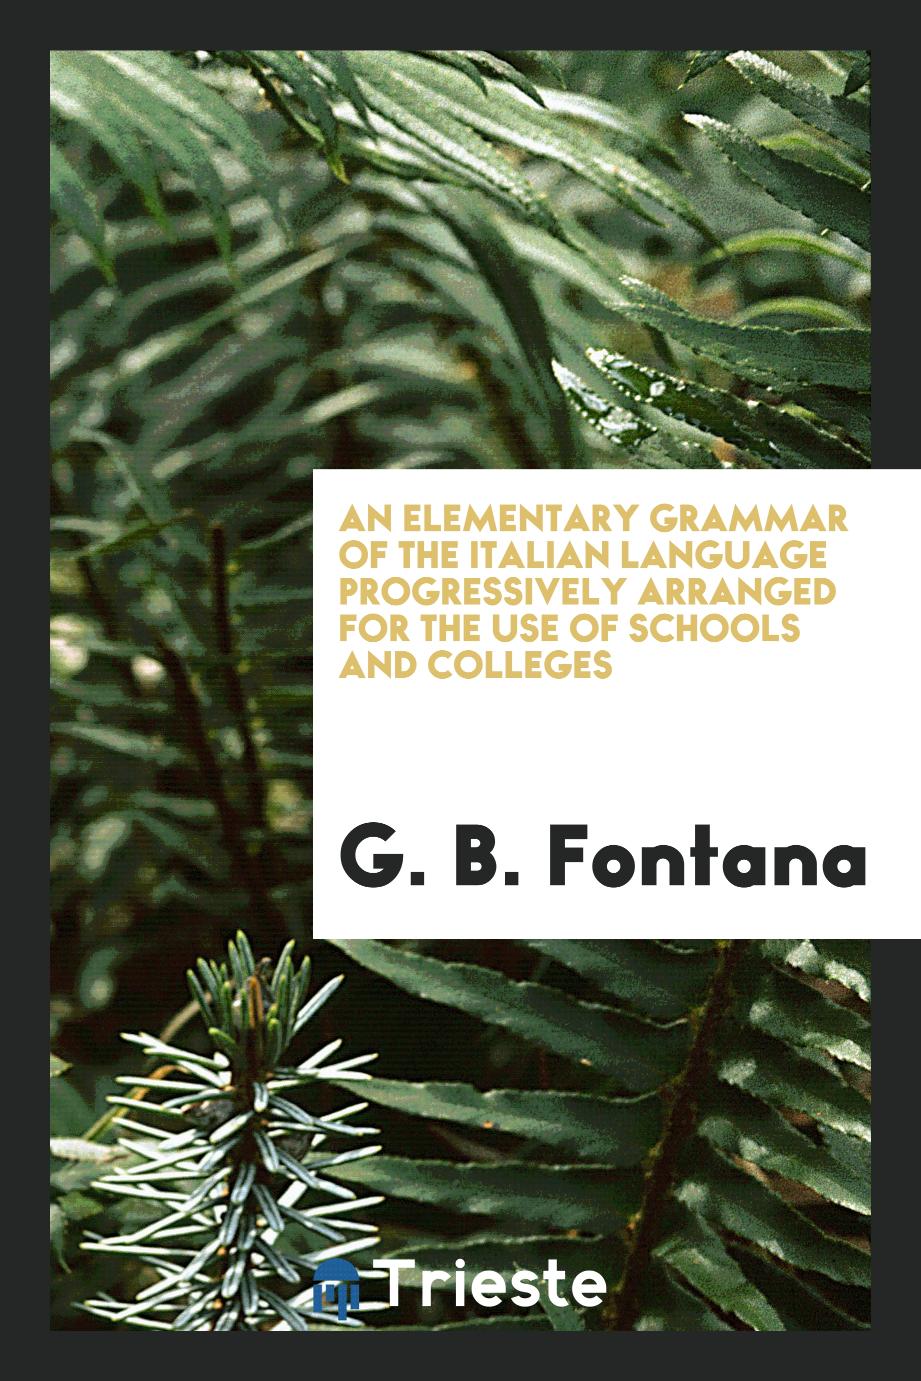 An Elementary Grammar of the Italian Language Progressively Arranged for the Use of Schools and Colleges